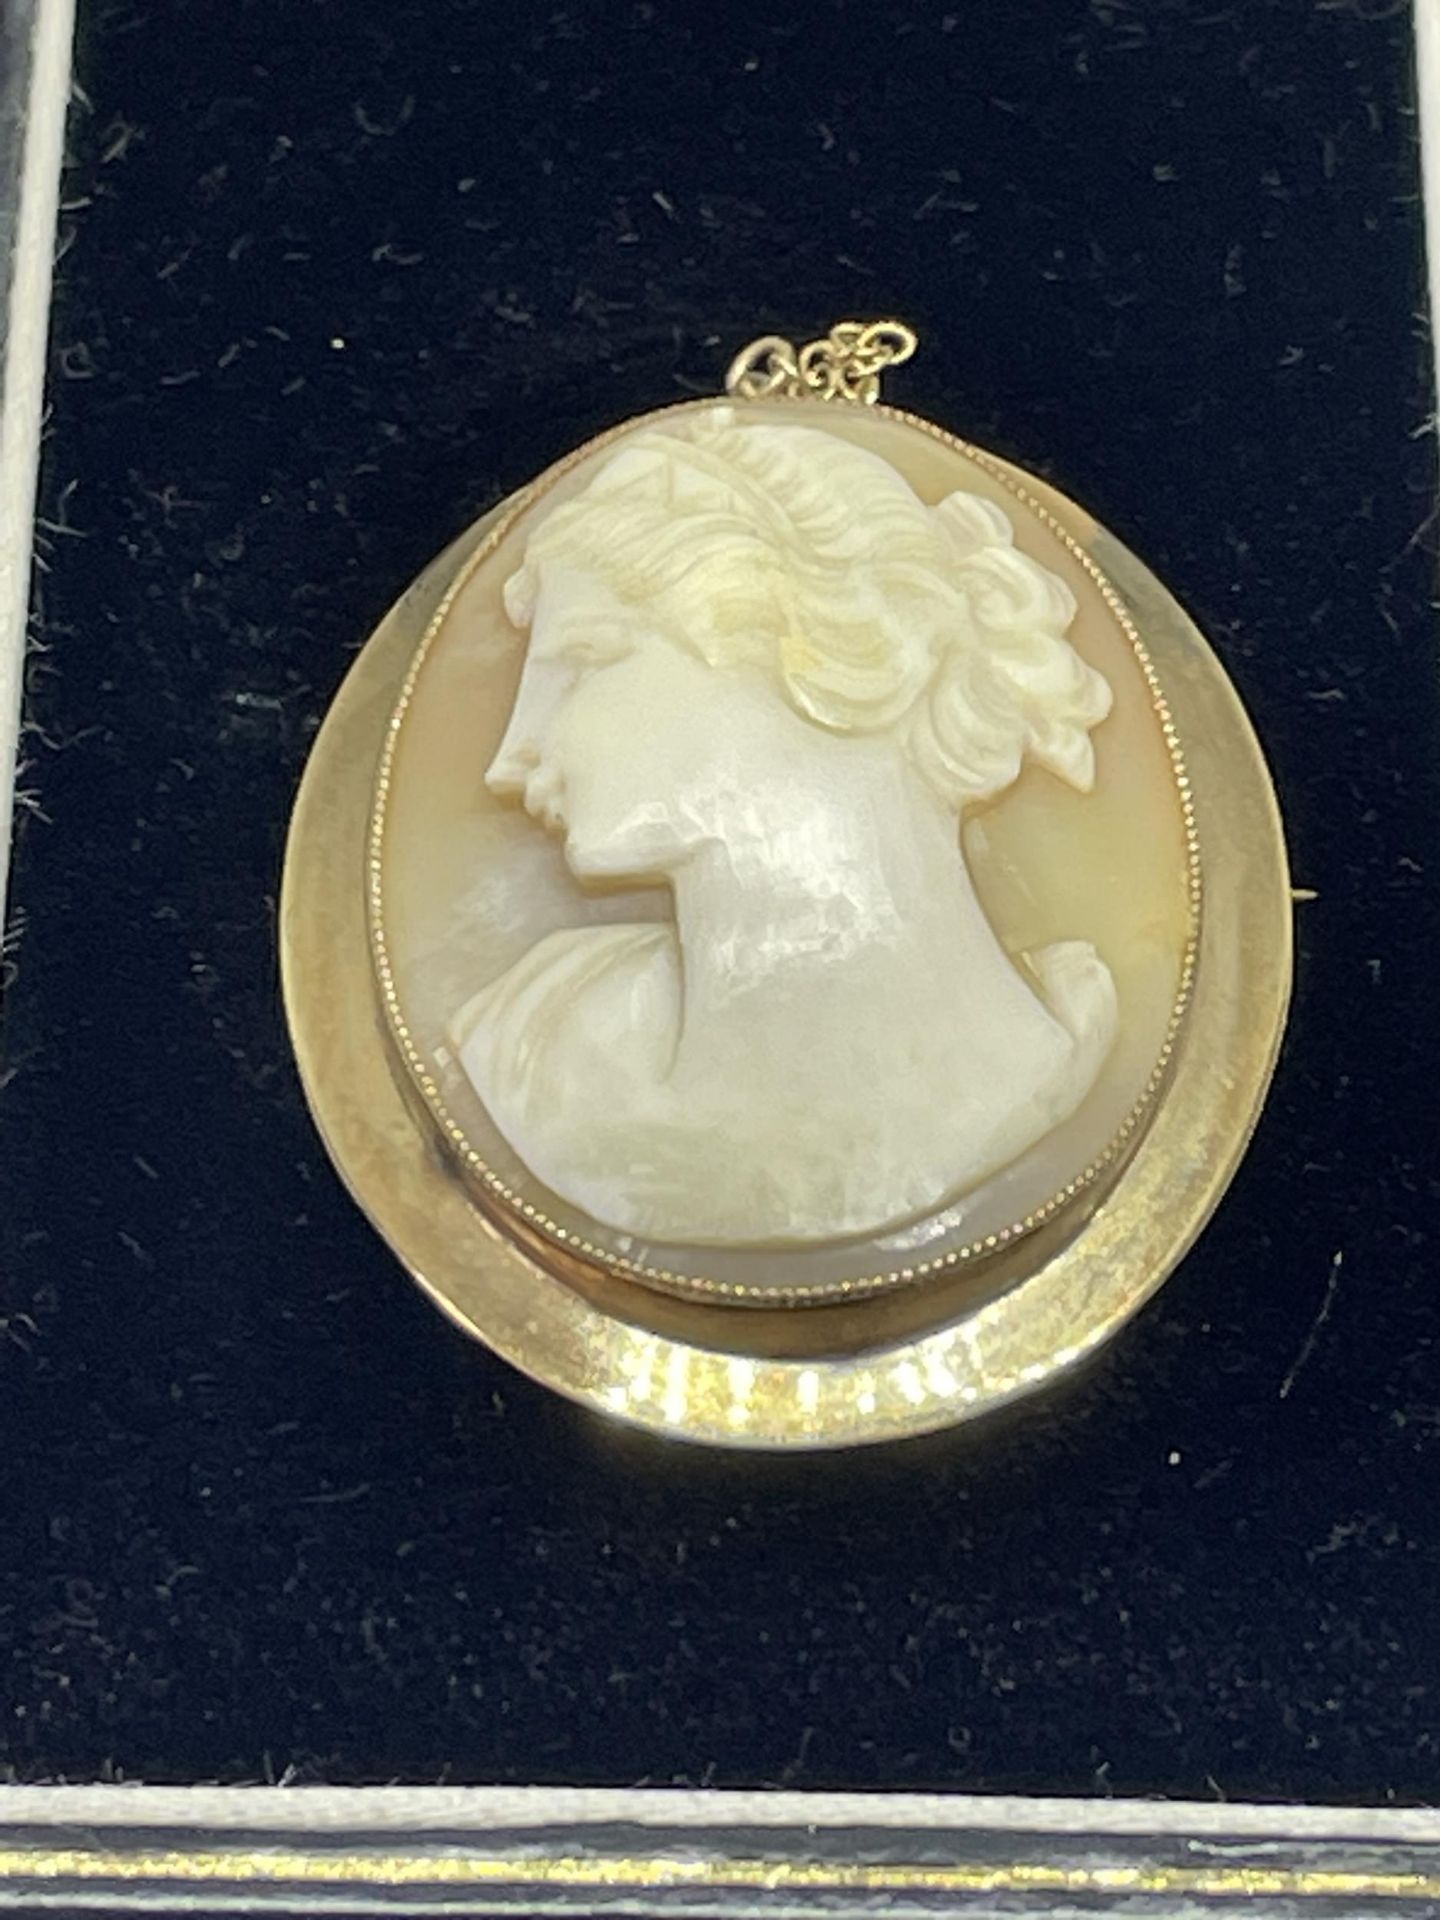 A CAMEO BROOCH WITH A 9 CARAT GOLD SURROUND GROSS WEIGHT 10.1 GRAMS WITH PRESENTATION BOX - Image 4 of 4